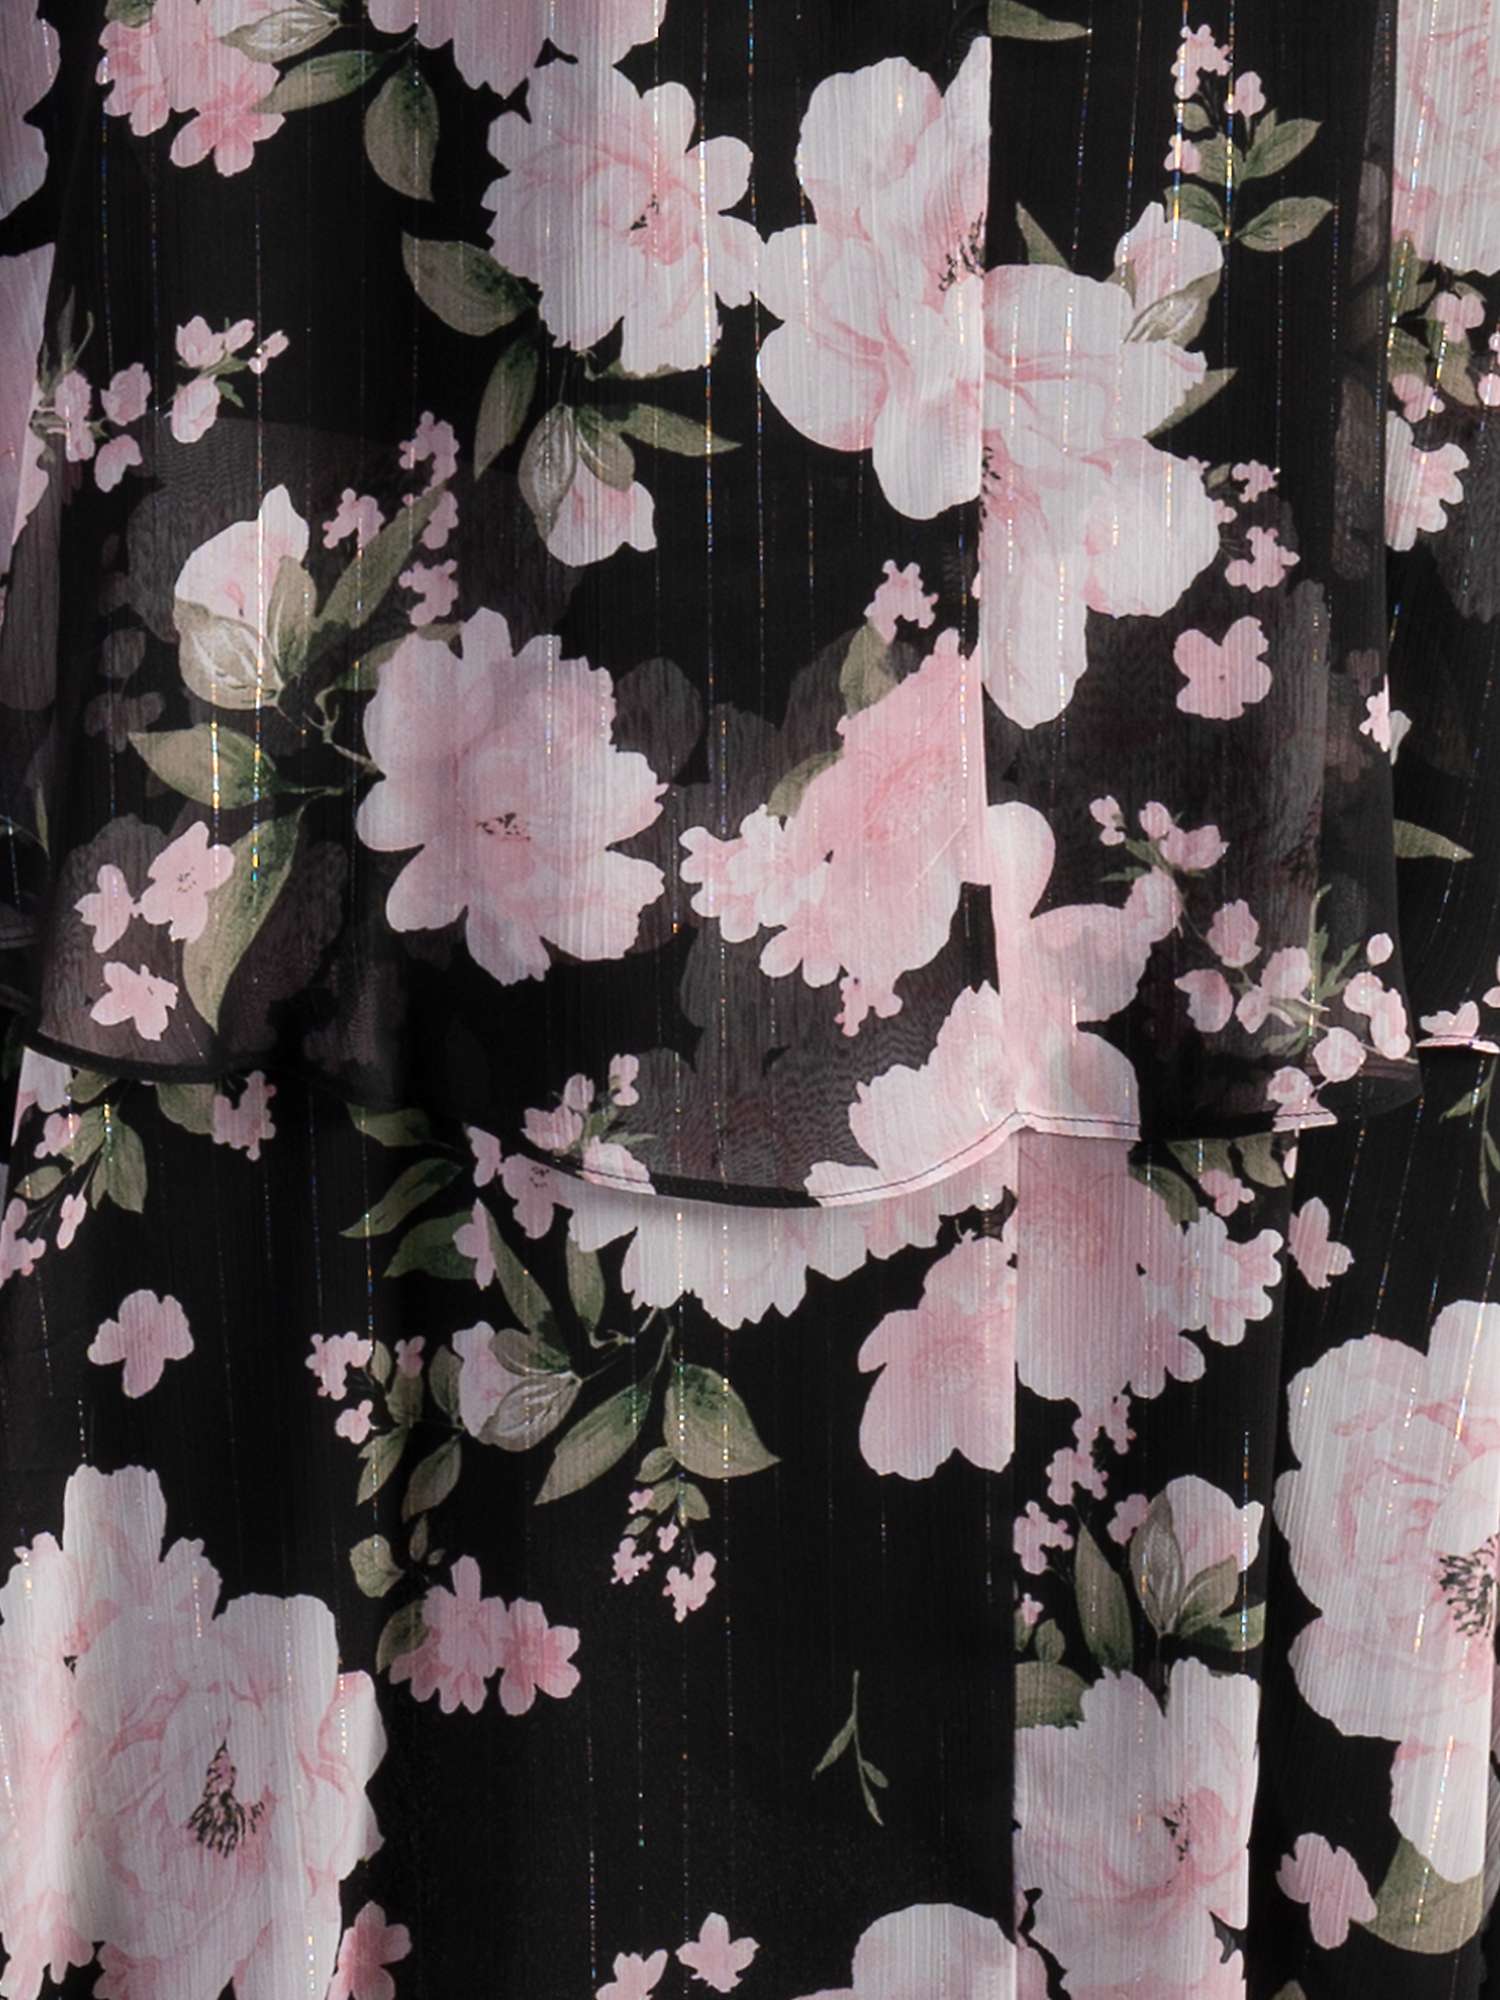 Buy chesca Wild Rose Print Tiered Chiffon Maxi Dress, Black/Pink Online at johnlewis.com